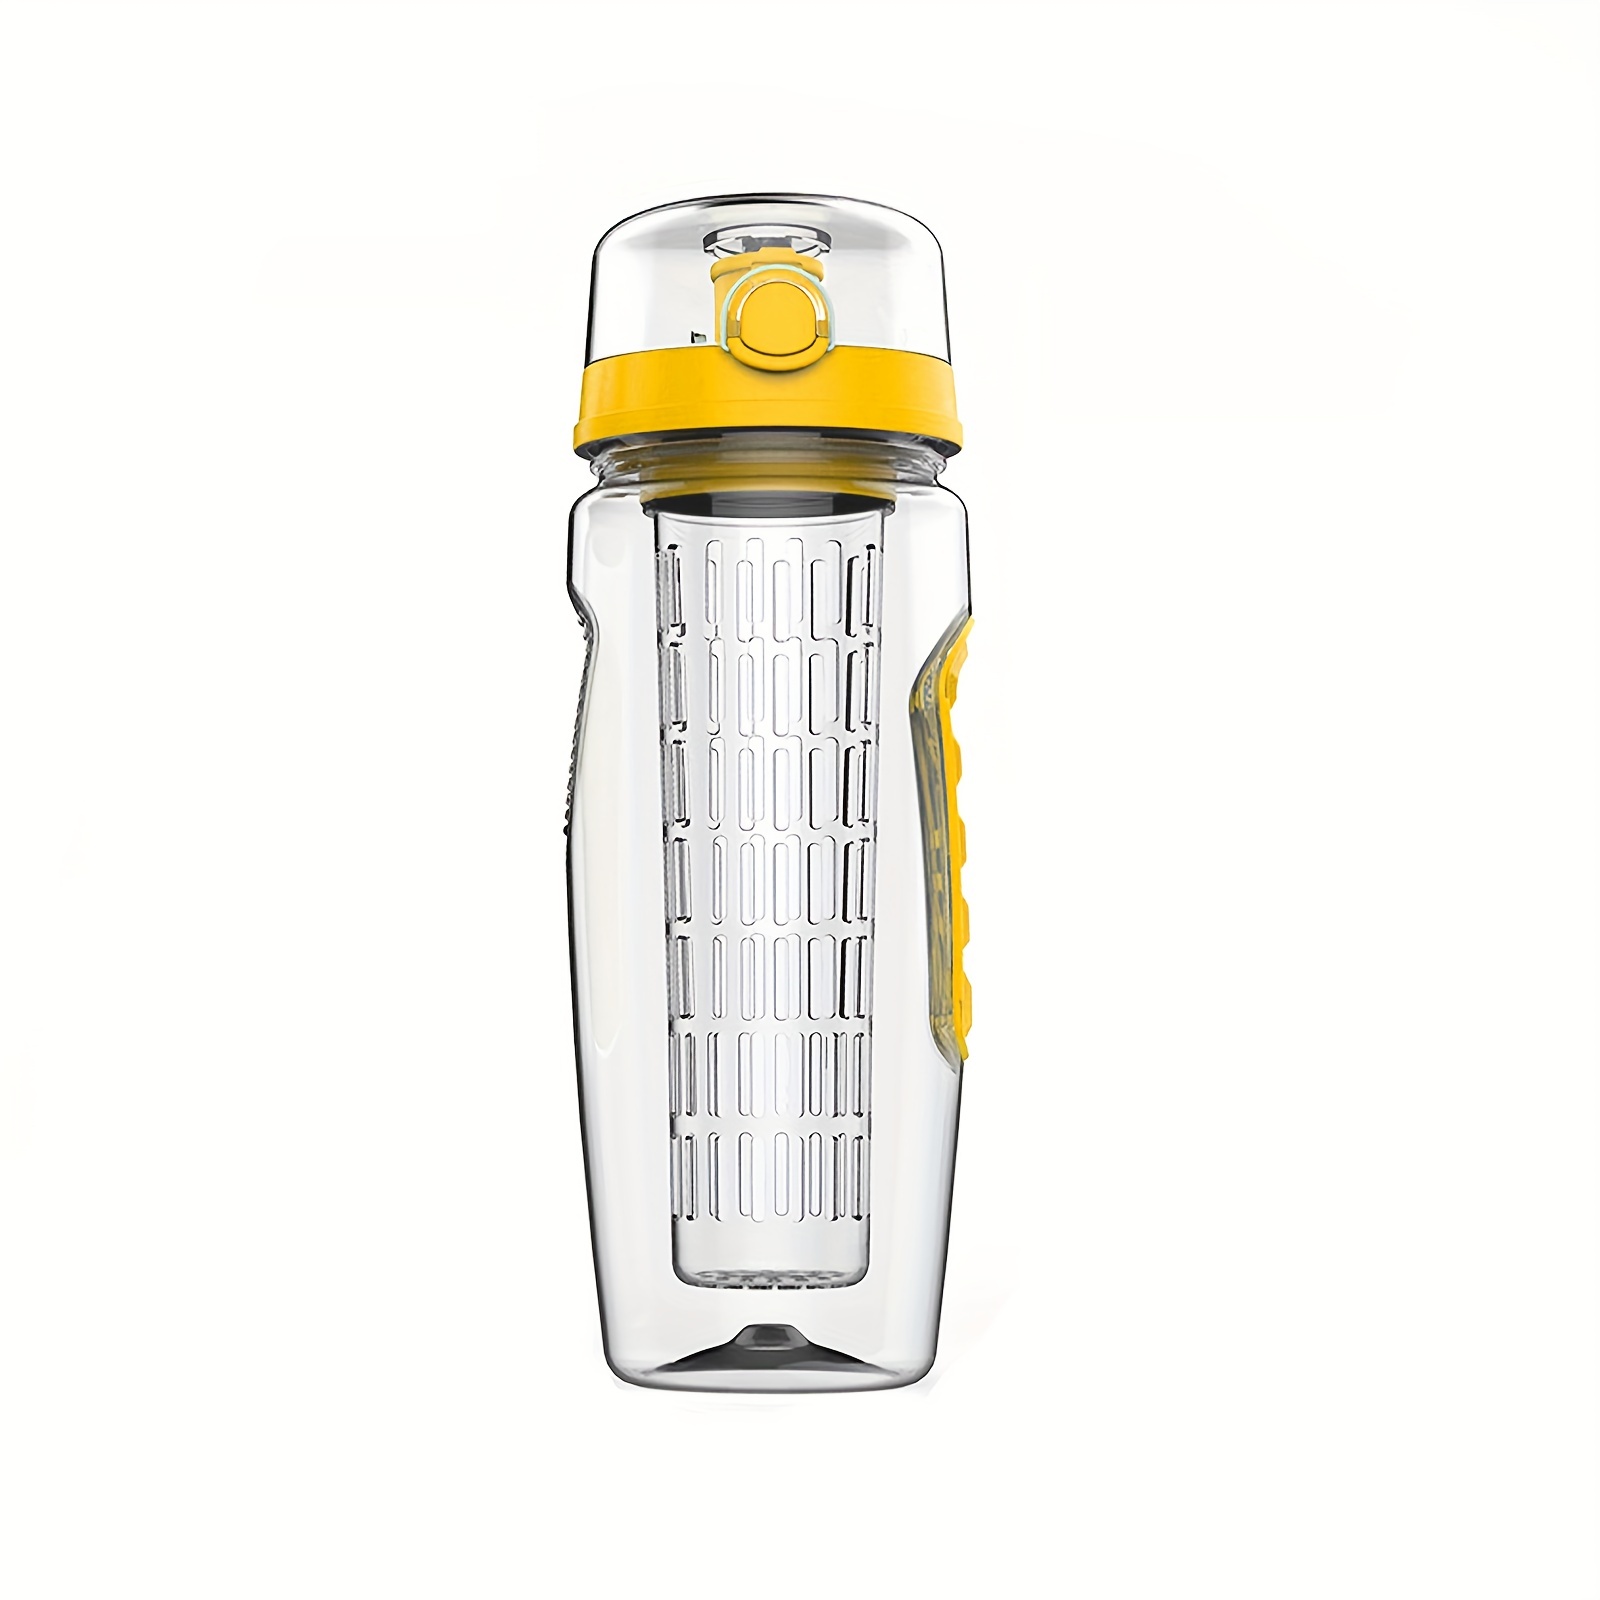 Fruit Infuser Water Bottle with Lid, Round Tritan Tumbler with Flavor Cartridge, BPA-Free Fruit Infusion Cup with Silicone Sleeve, Flavor Infuser